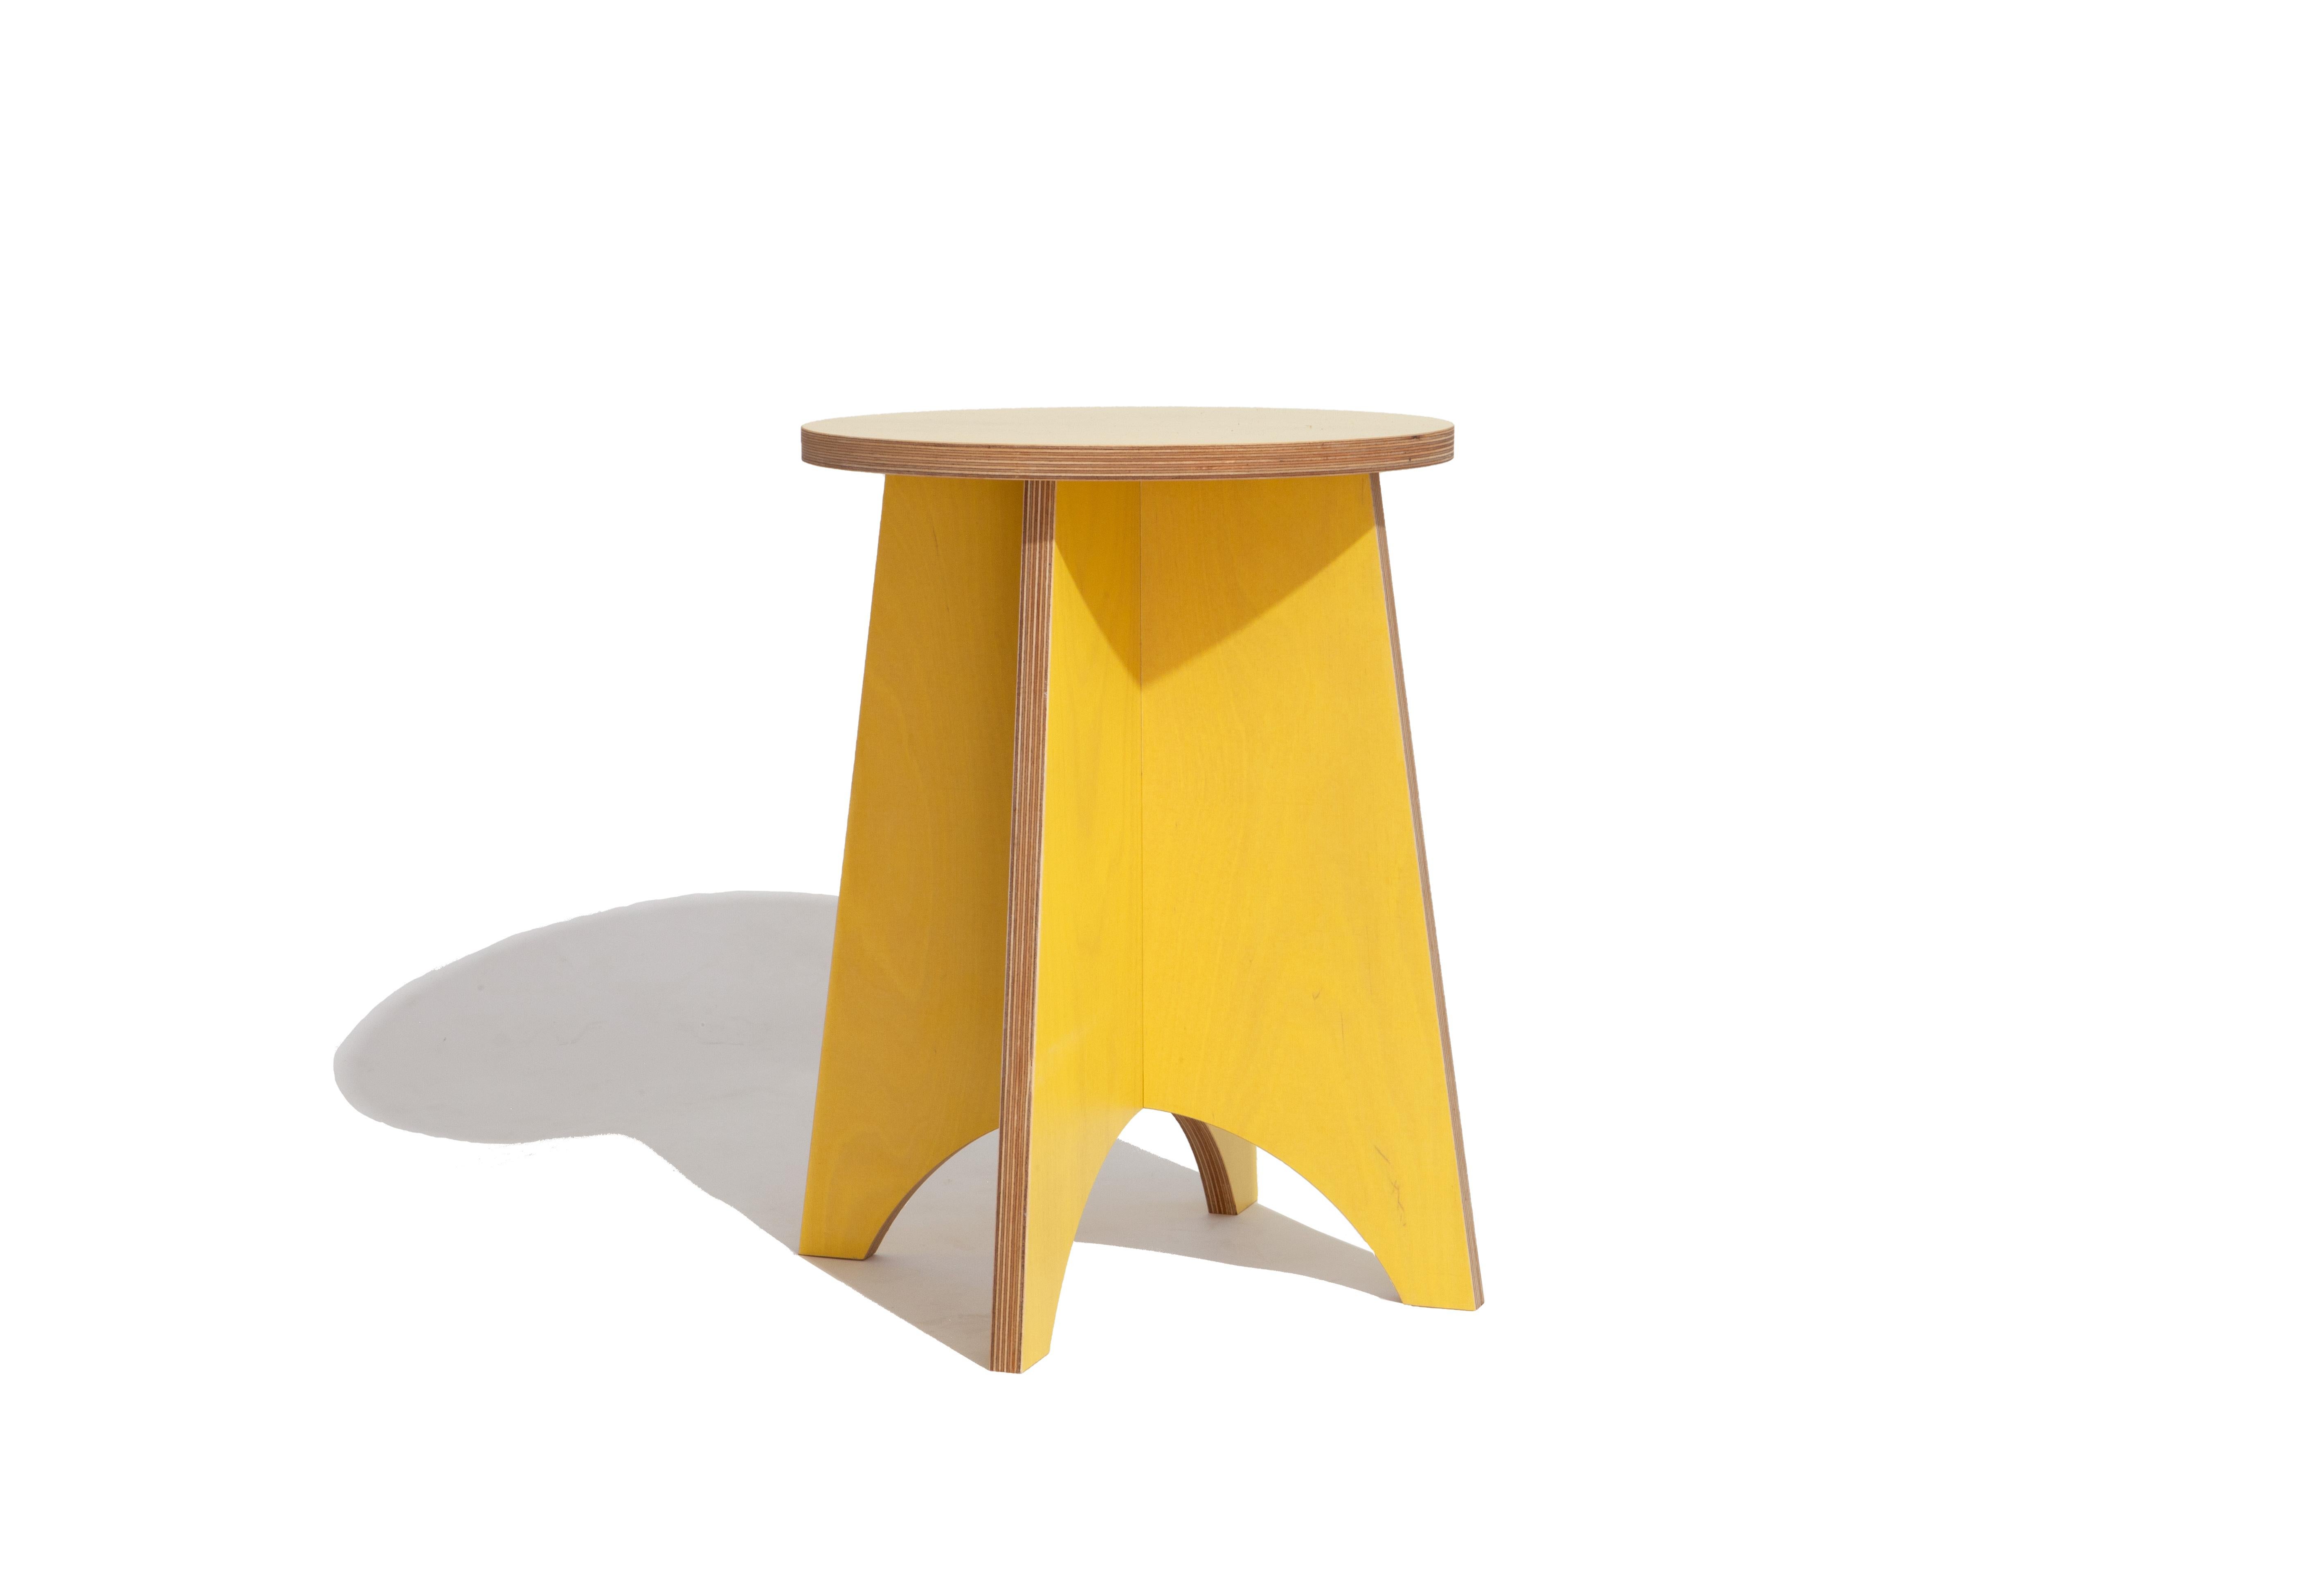 Contemporary Zero-Waste Plywood Upstate New York-Made Side Table or Stool For Sale